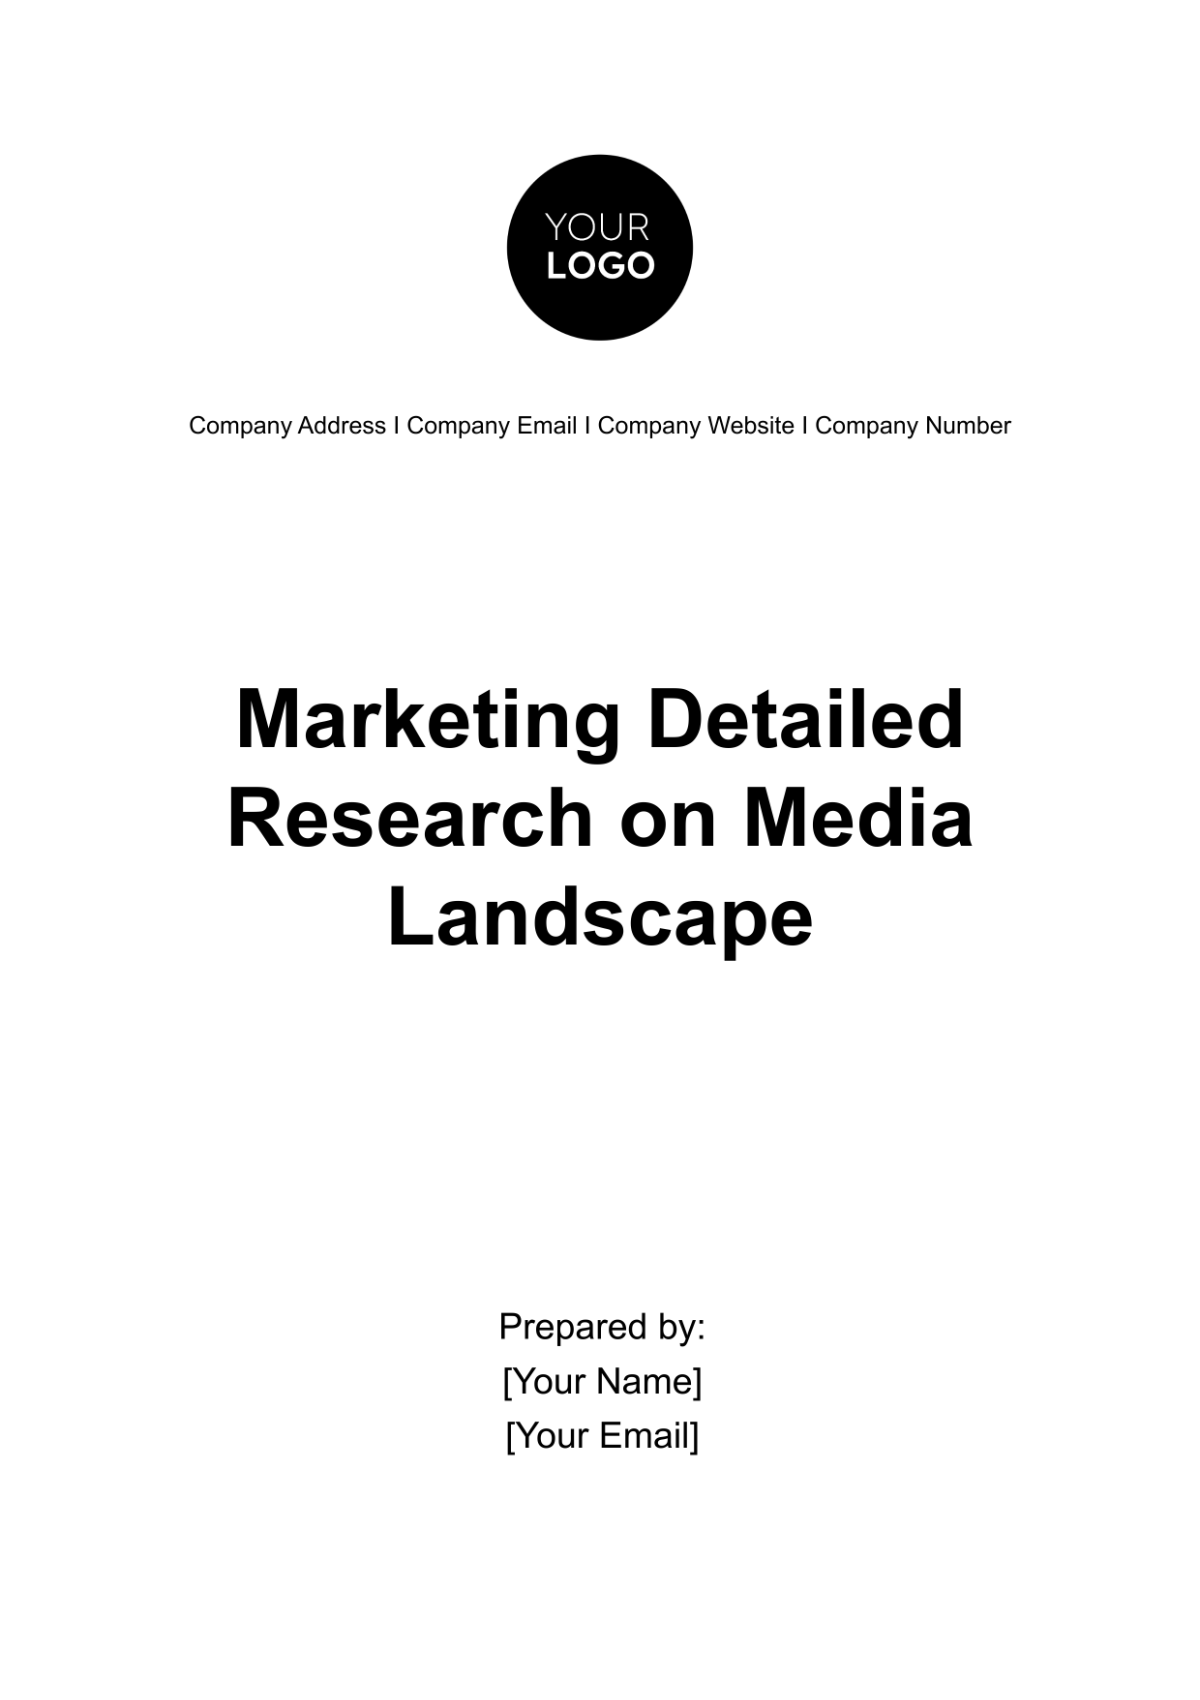 Marketing Detailed Research on Media Landscape Template